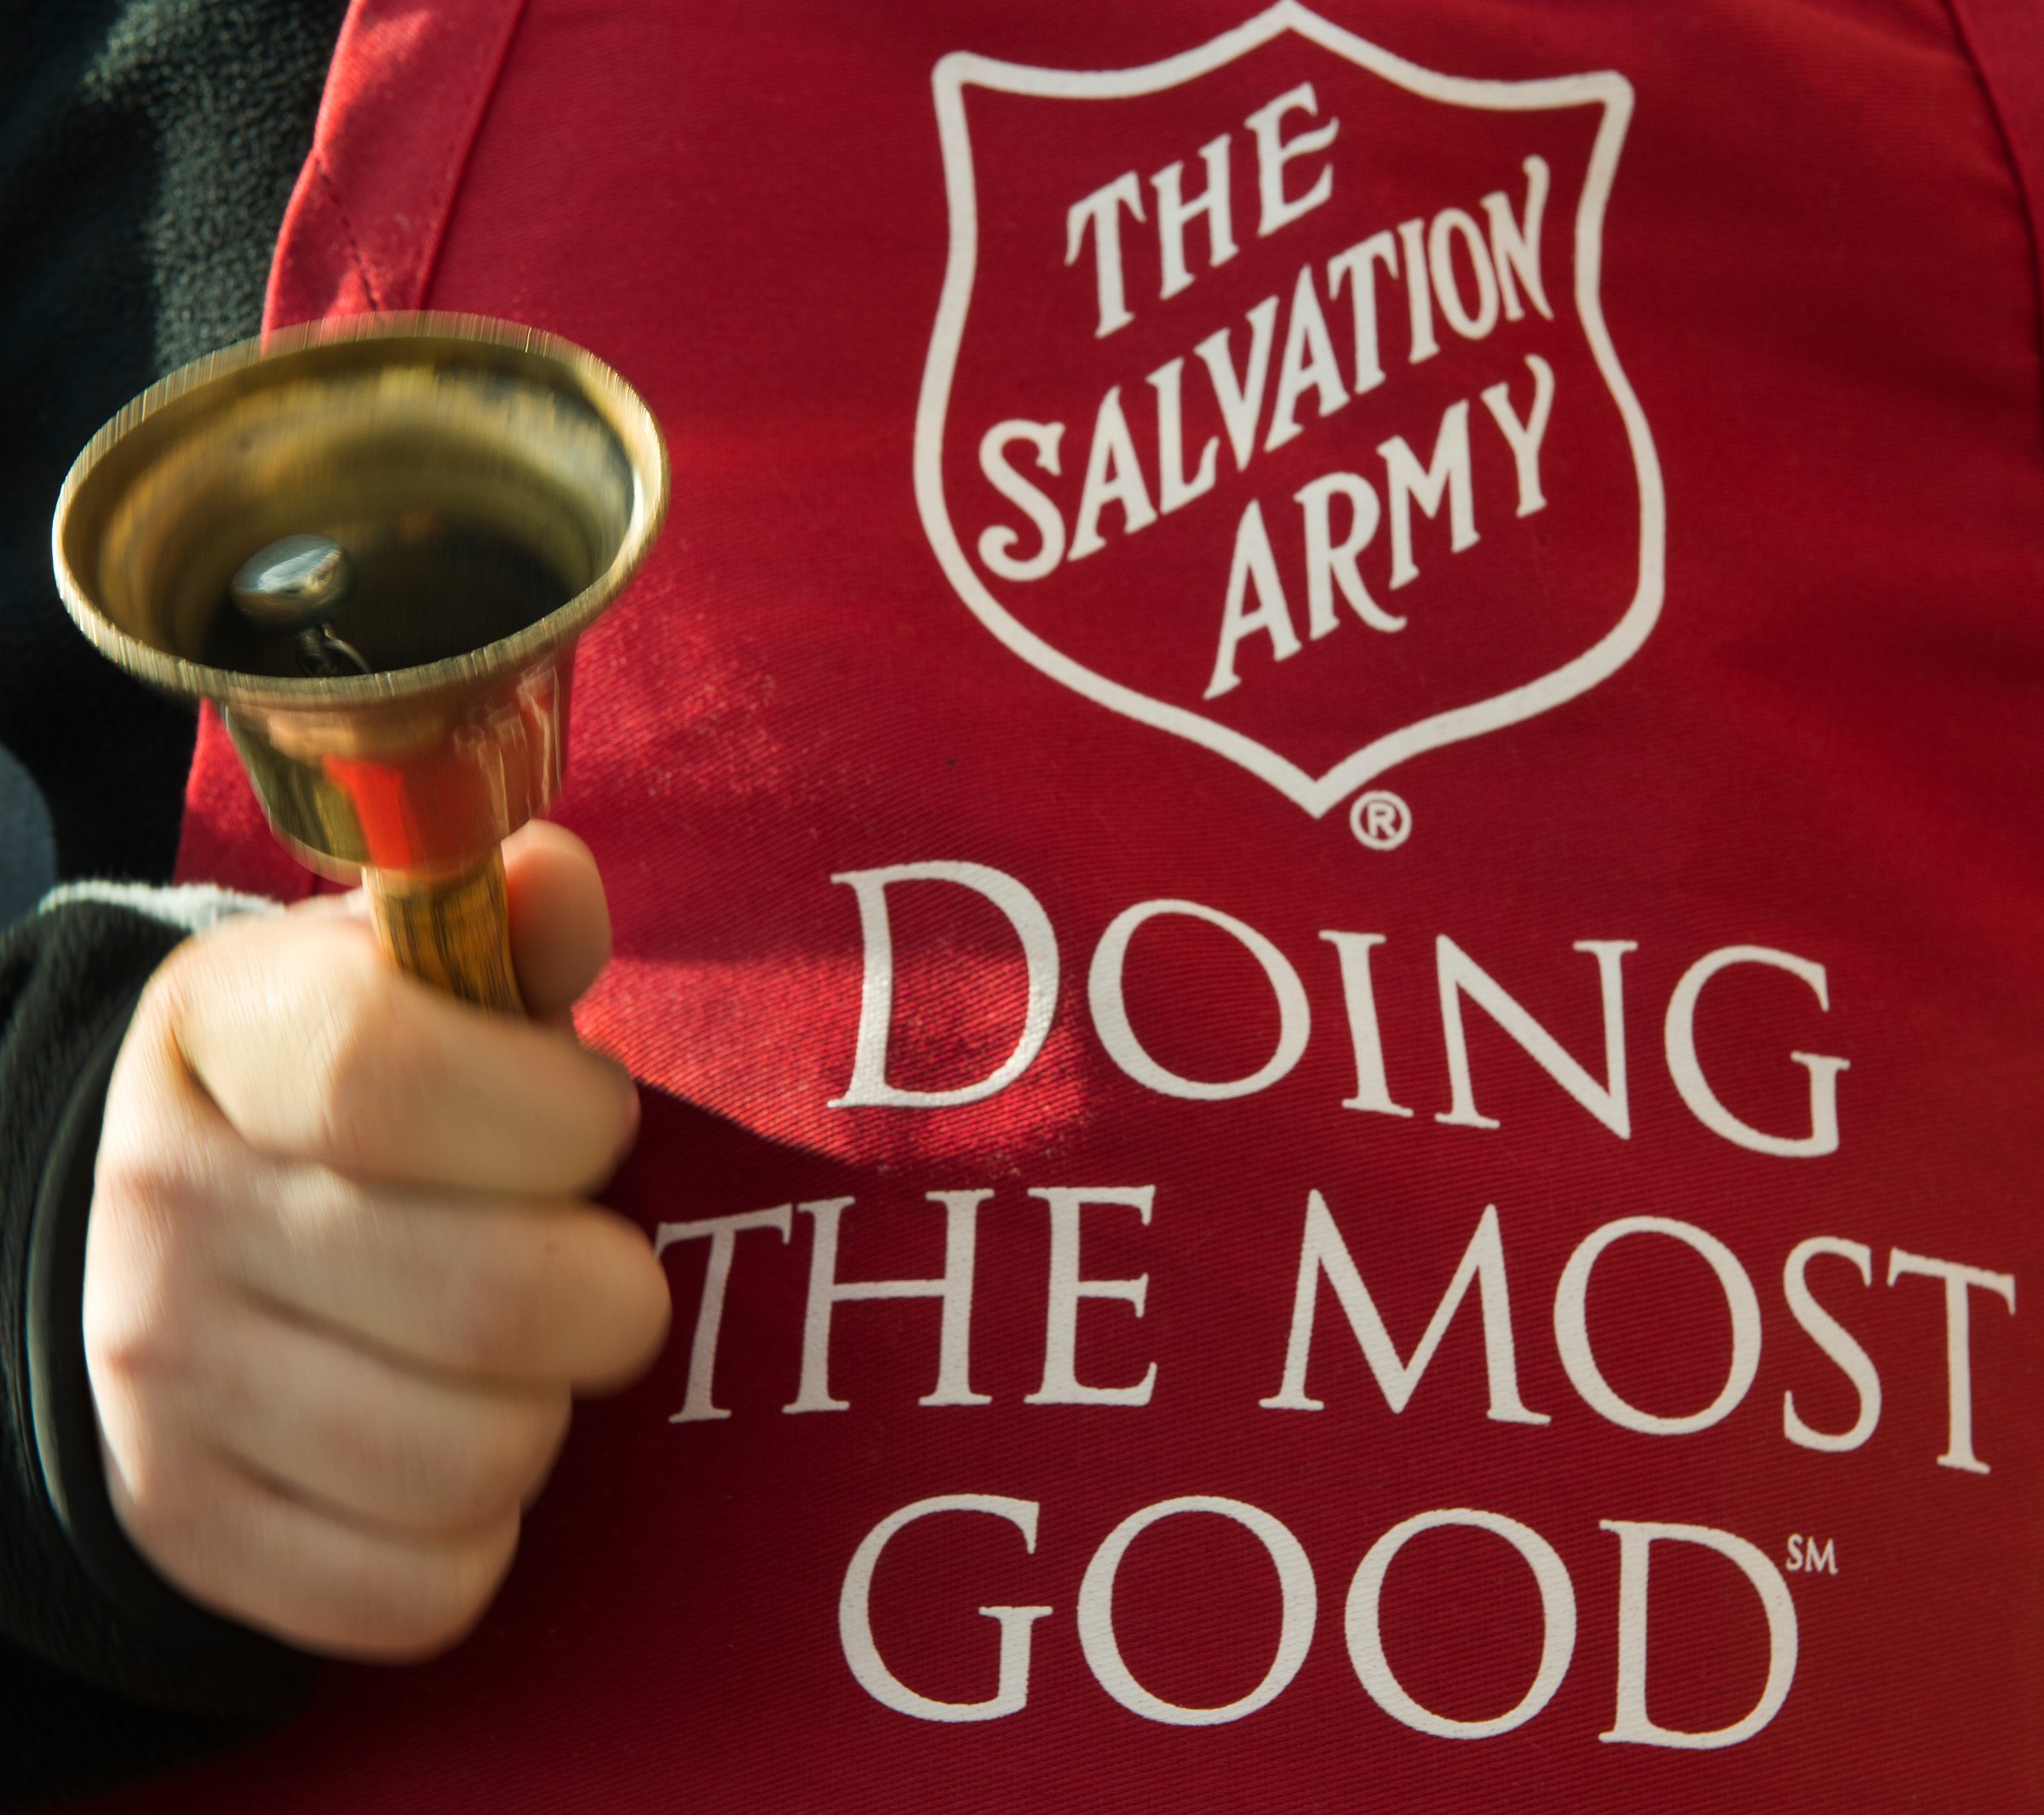 Salvation Army volunteer rings the collection bell outside a grocery store on Nov. 24, 2012 in Clifton, Virginia.